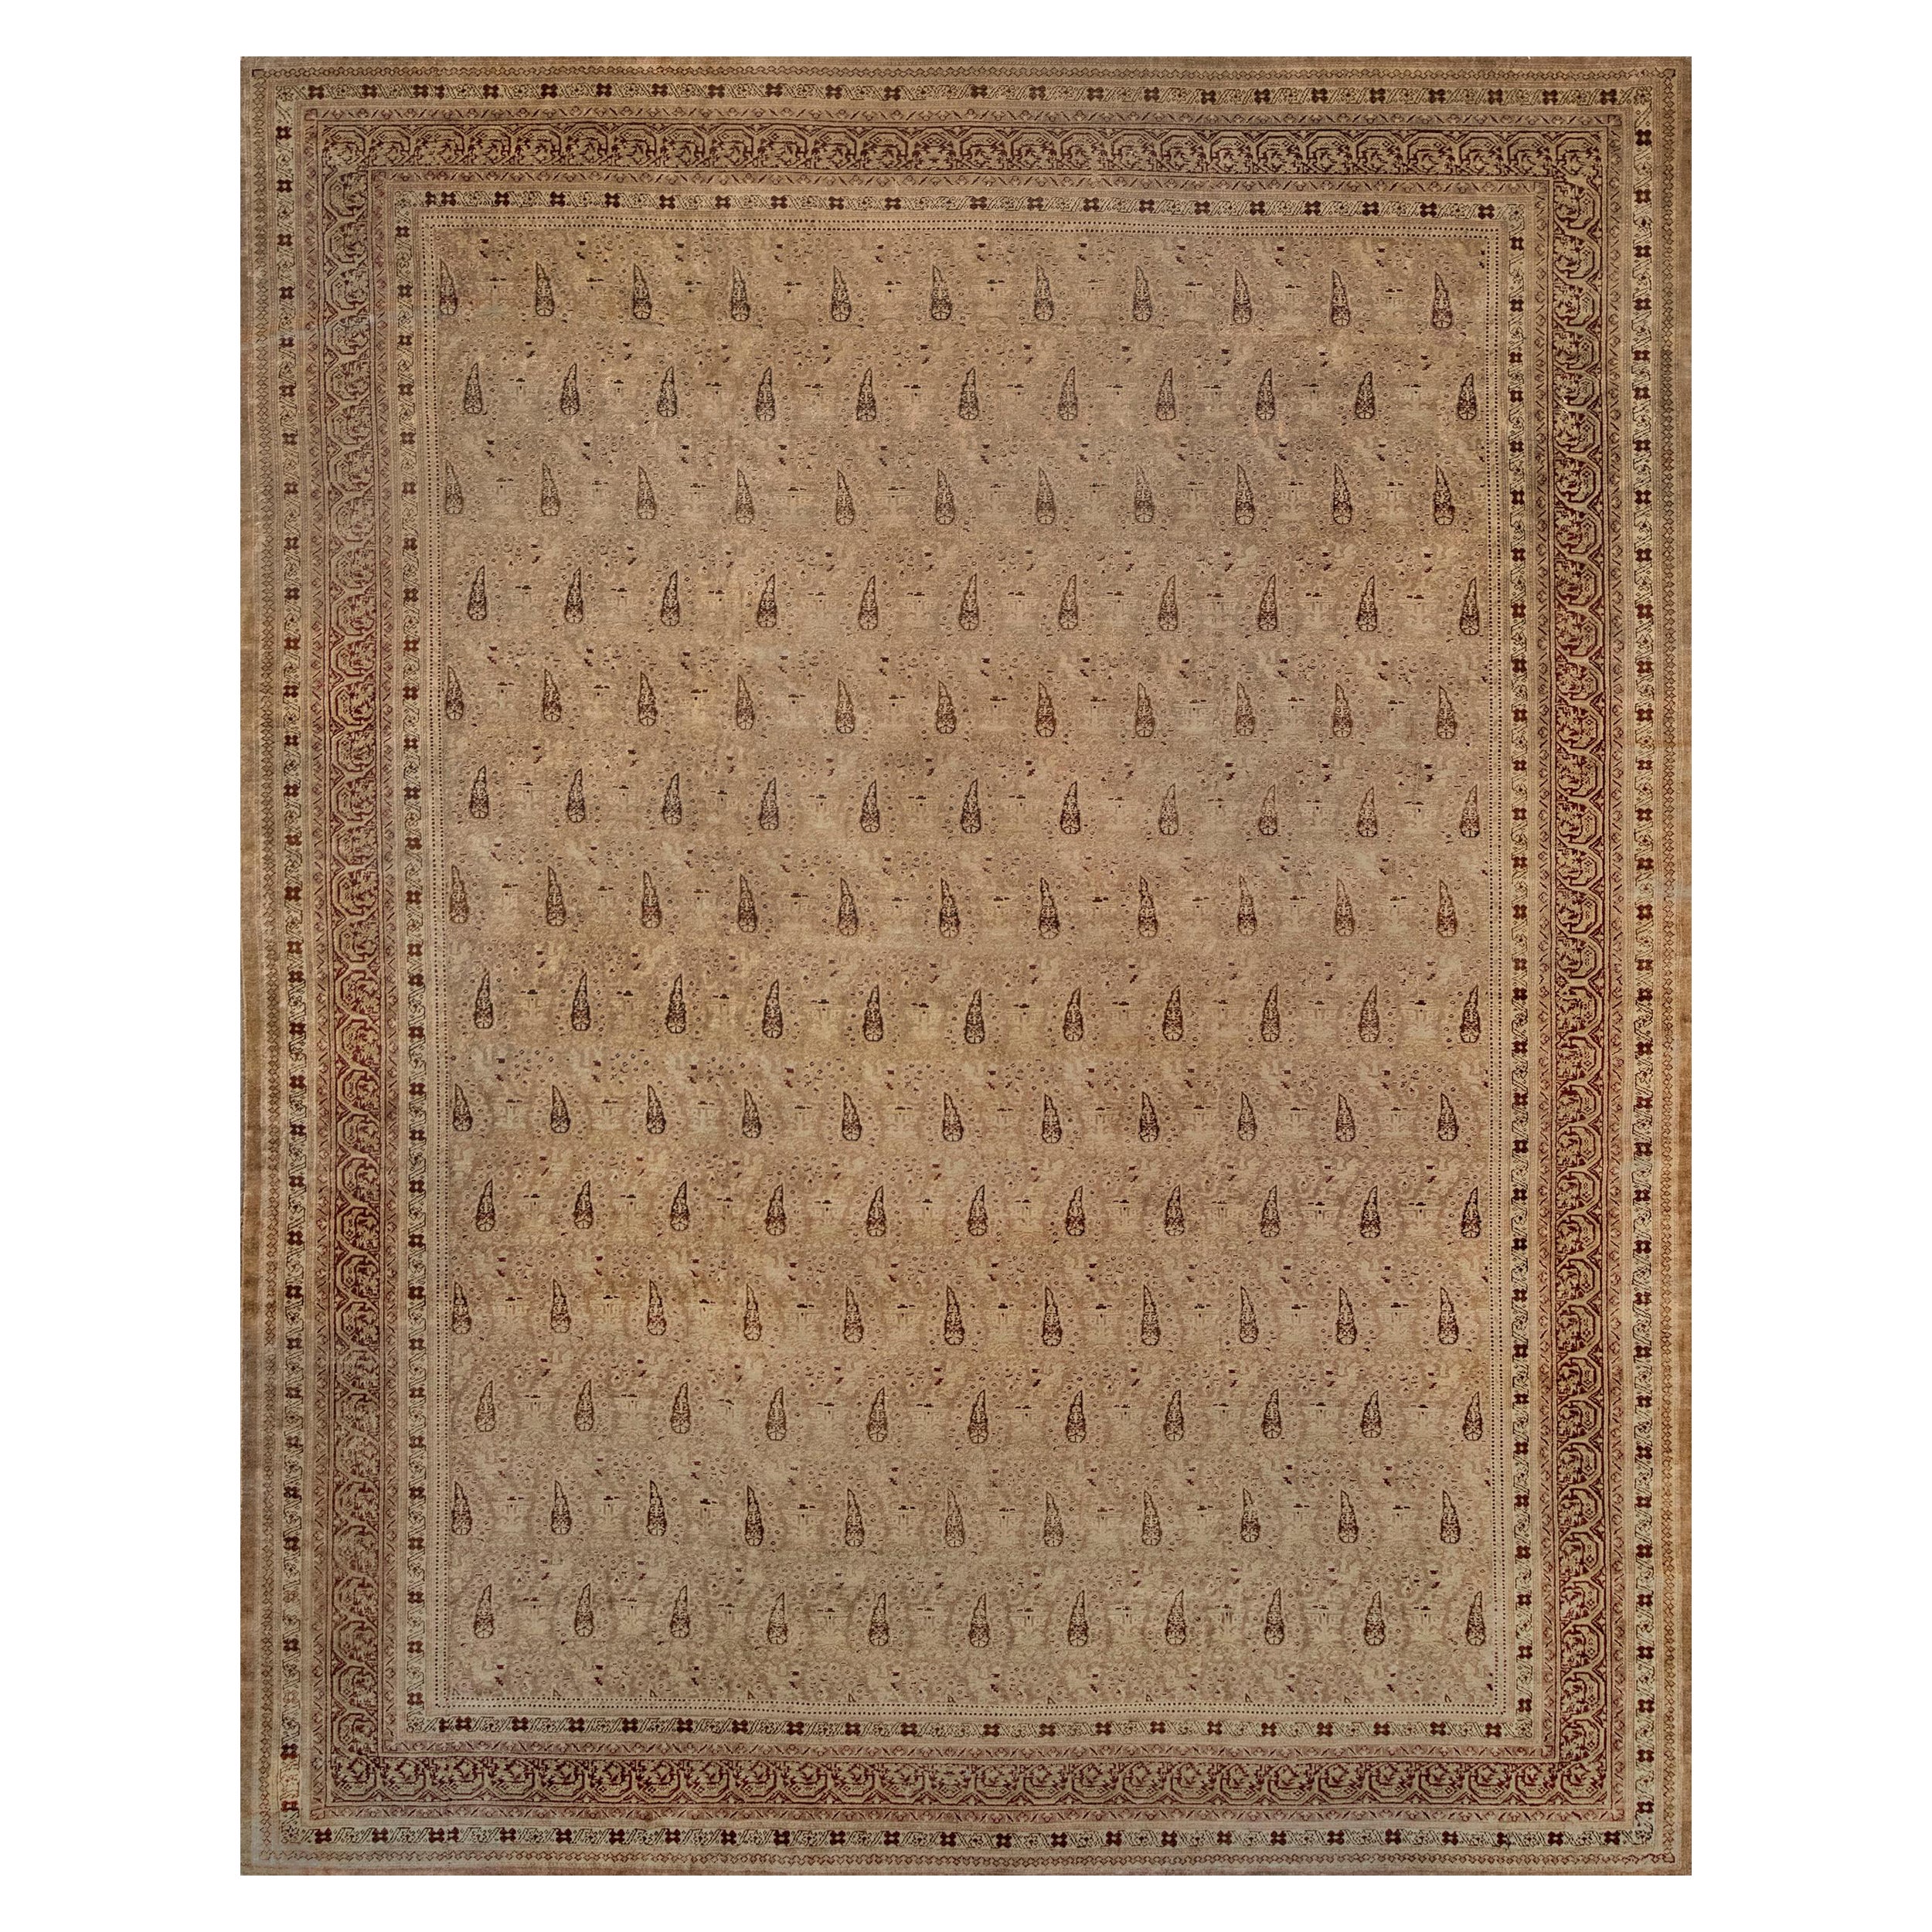 Antique Circa-1900 Camel-Brown Hand-woven Wool Boteh Indian Agra Rug For Sale